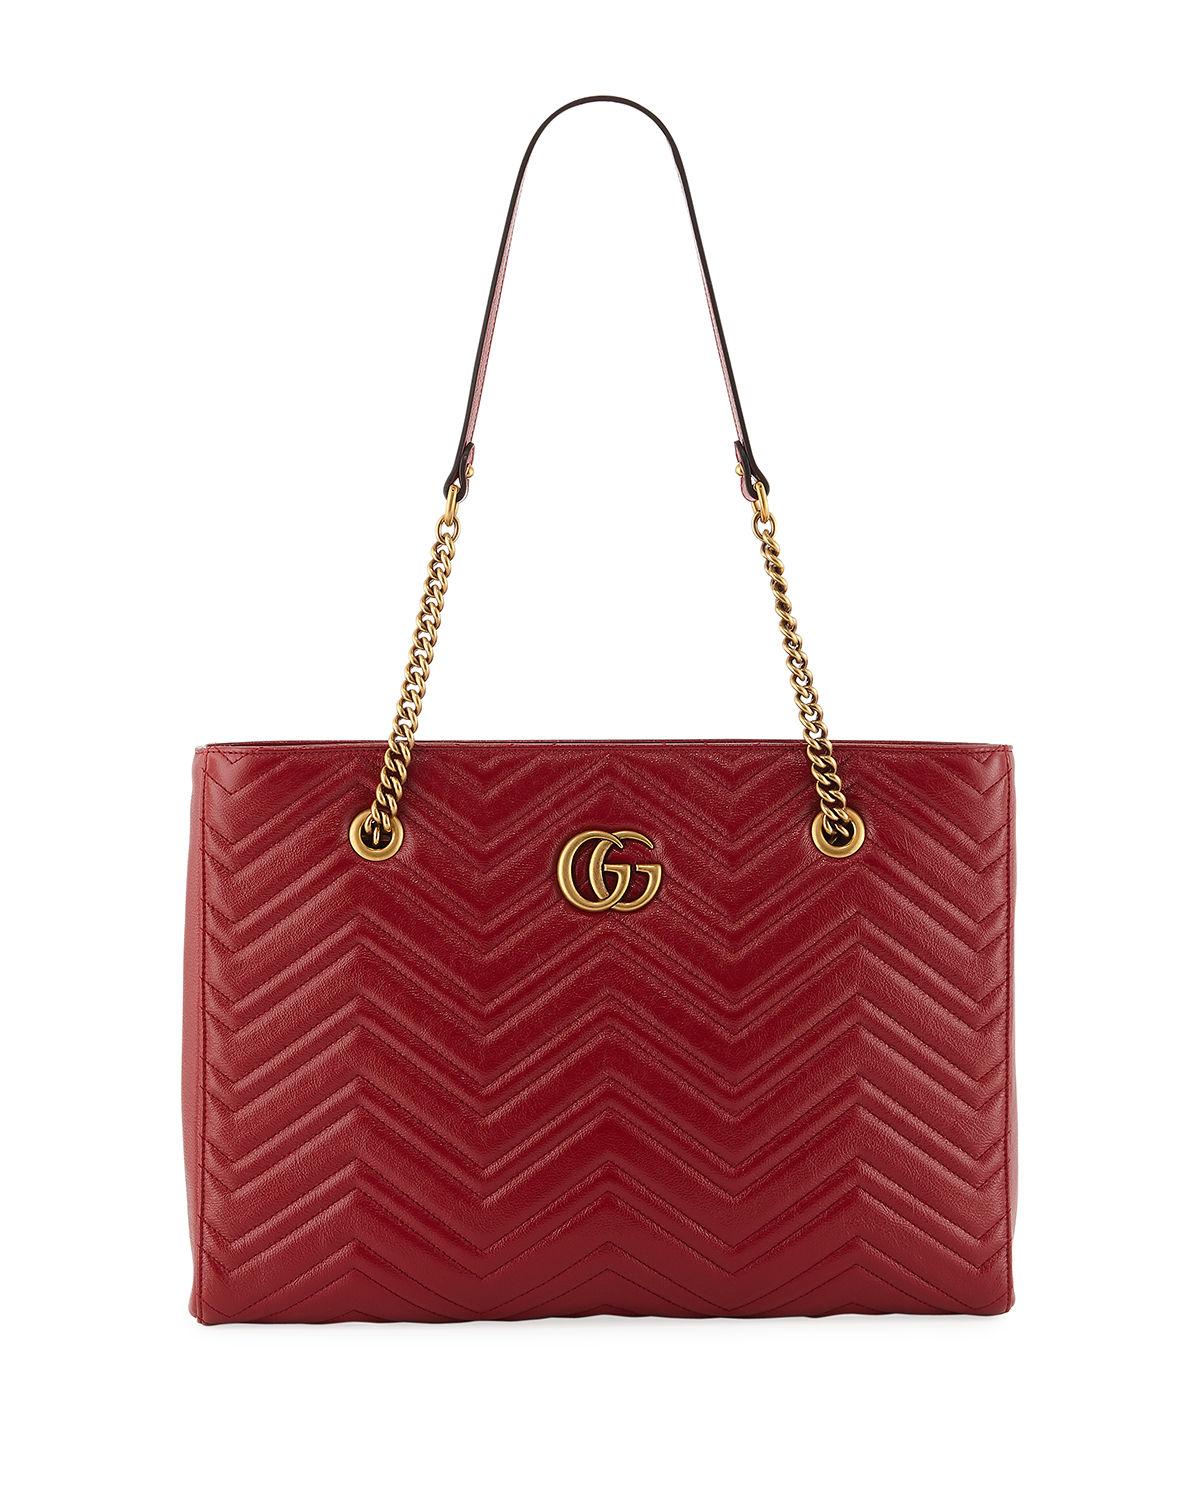 Gucci GG Marmont Medium Quilted Leather Shoulder Tote Bag in Red - Lyst